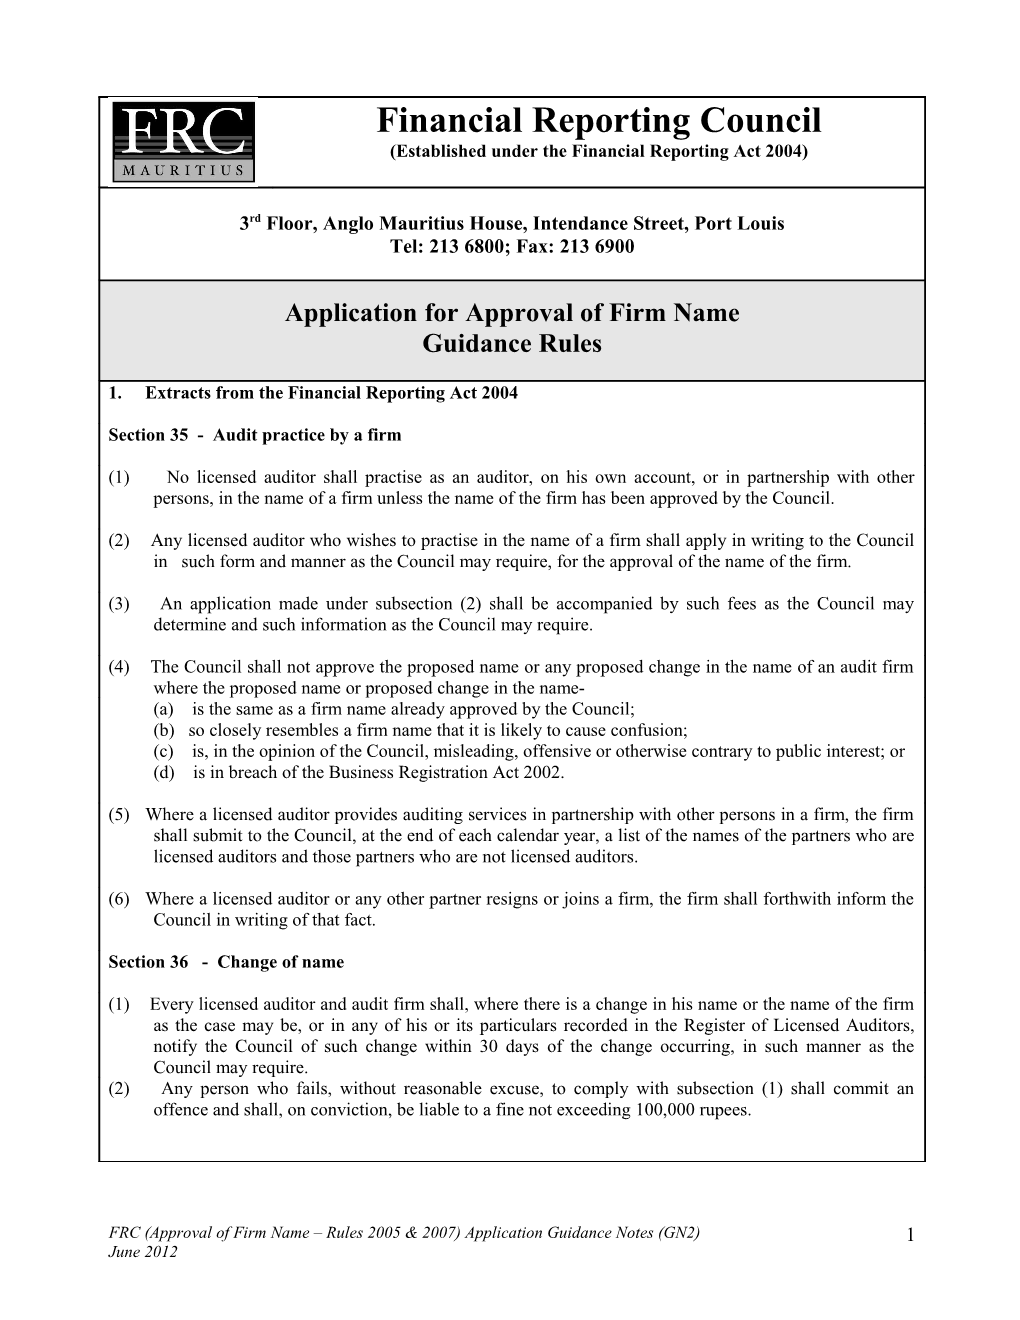 FRC(Approval of Firm Name Rules 2005 & 2007) Application Guidance Notes (GN2)